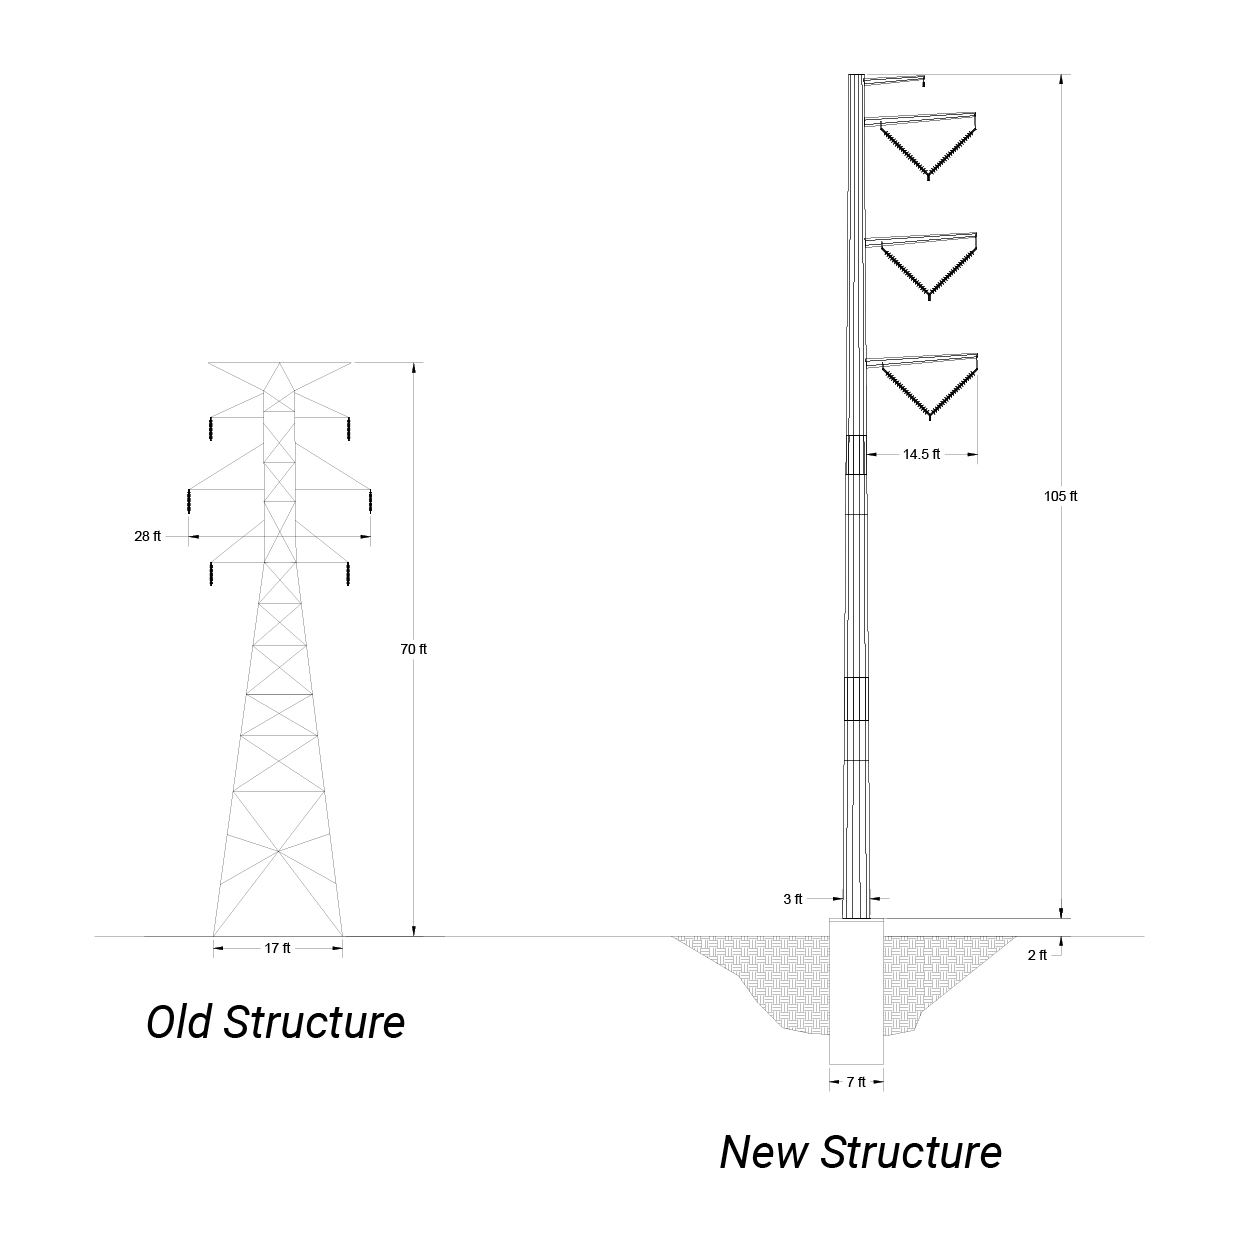 Comparison of old structure to new structure